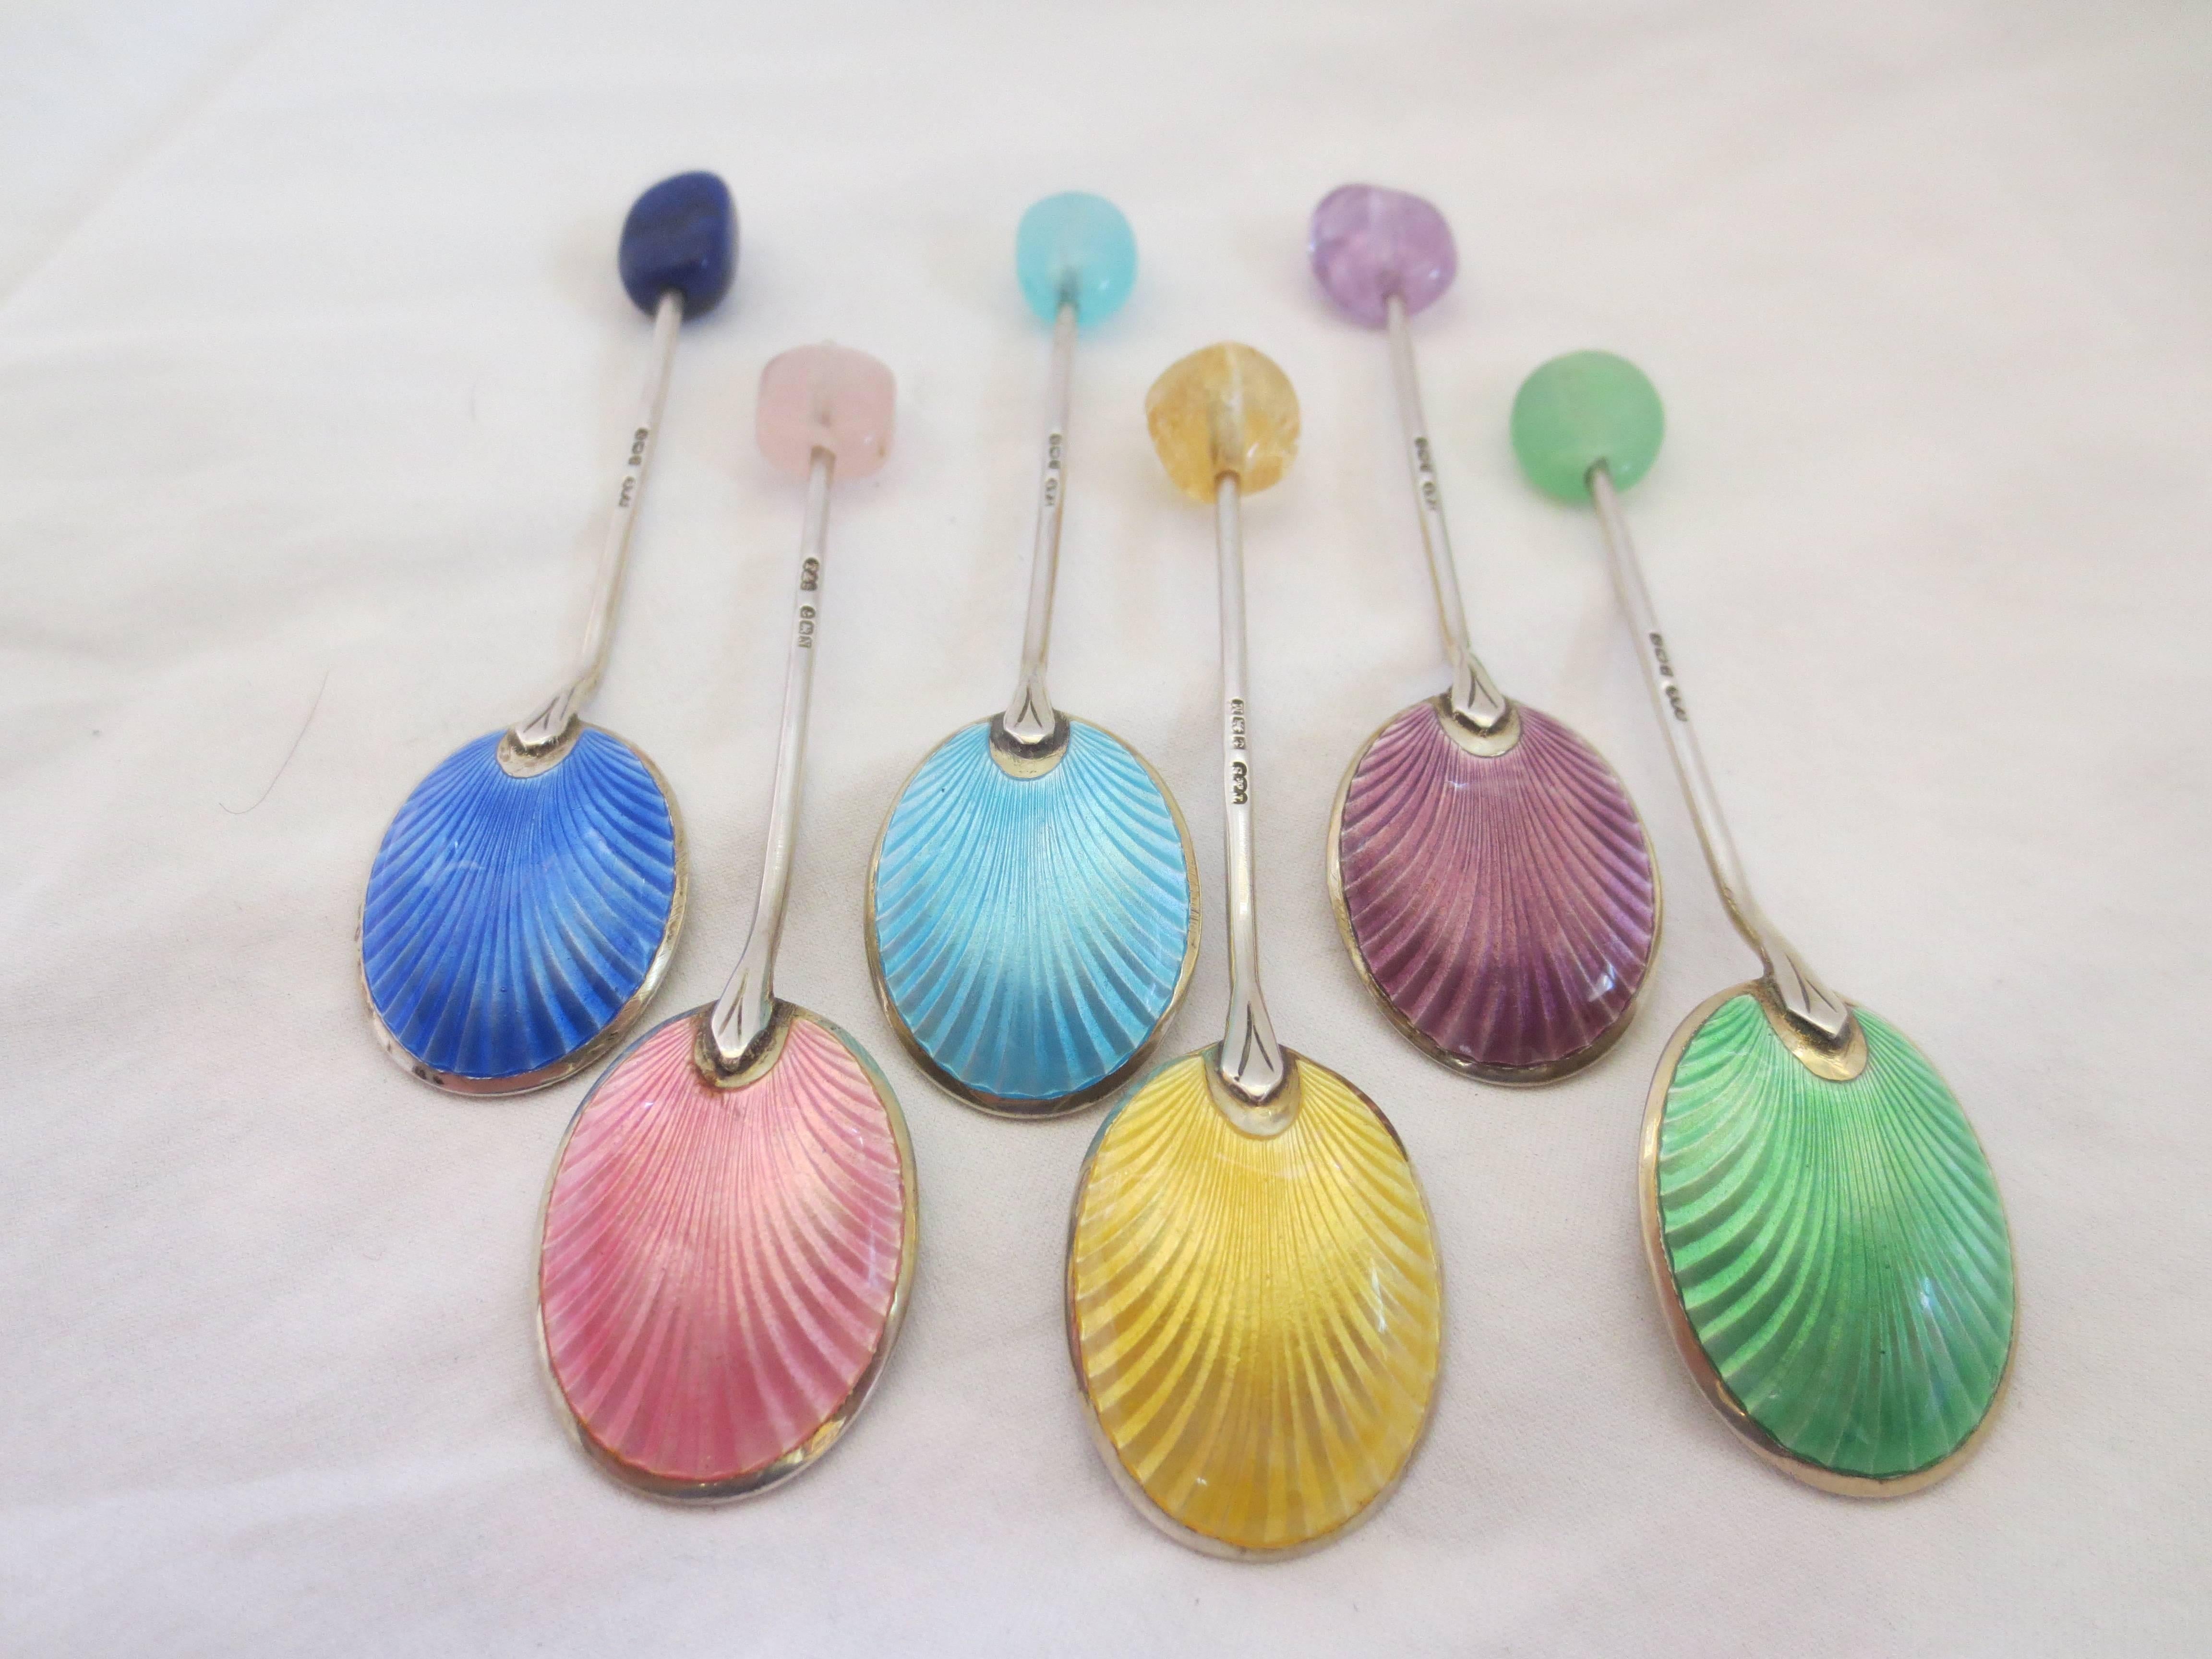 One-of-a-kind Enameled Silver Spoons Refurbished with Semi precious stone beads. 4